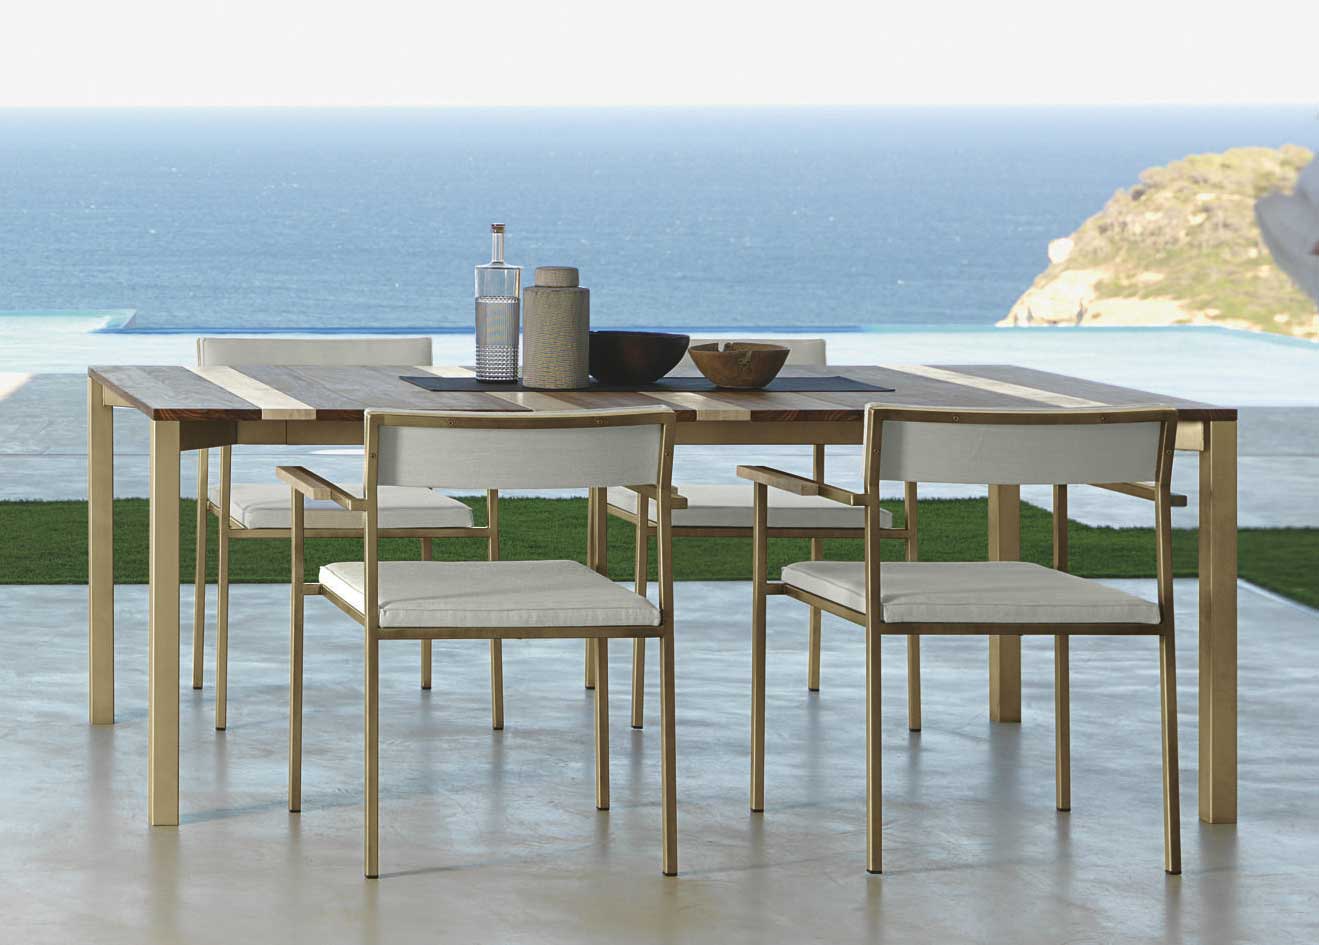 Garden table with stainless steel frame. Top in iroko wood and travertine. Patio furniture design by Ramon Esteve. Shop online for outdoor table and chairs.